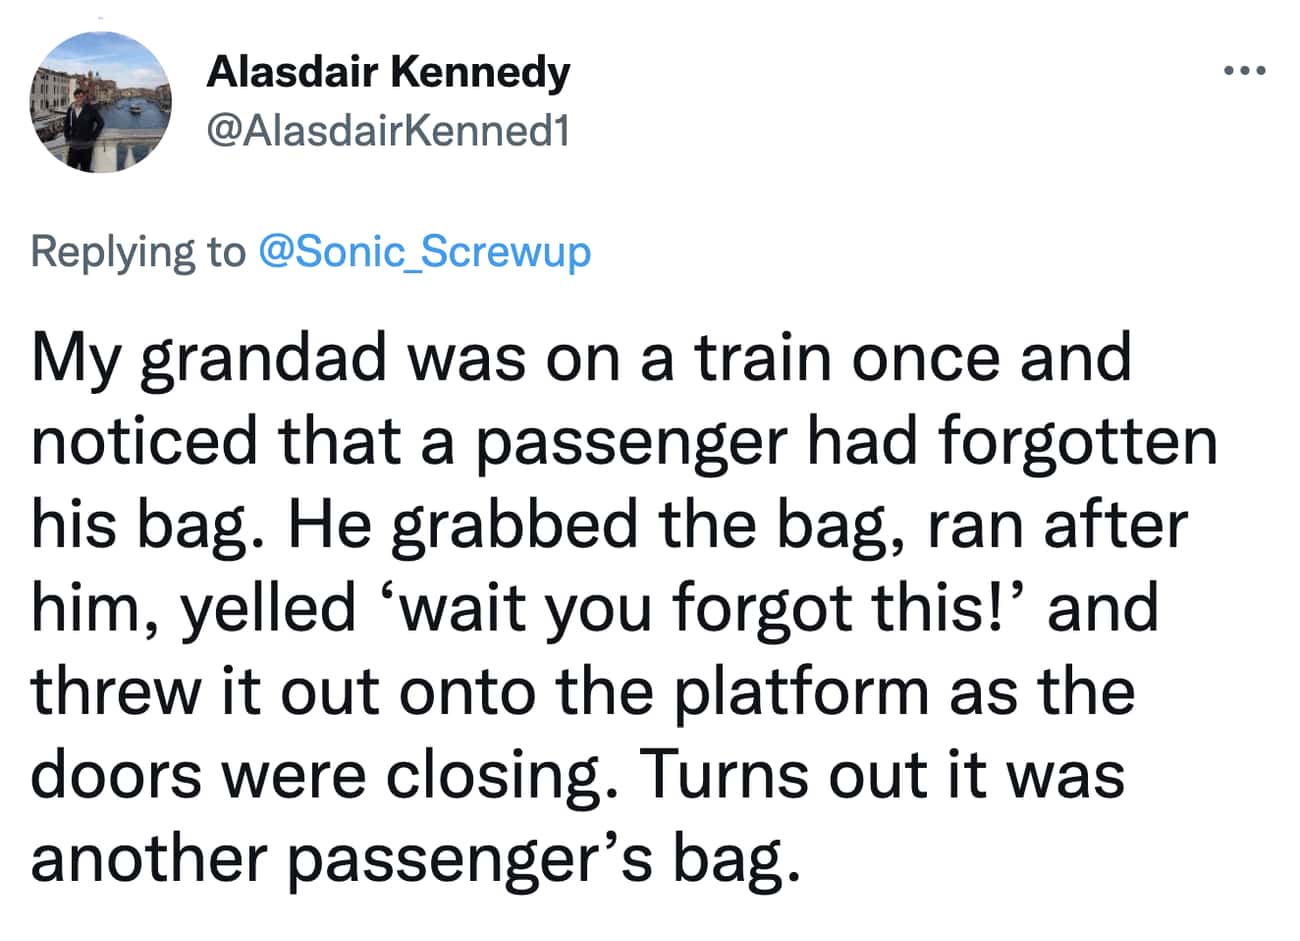 Forgetting A Bag On The Train